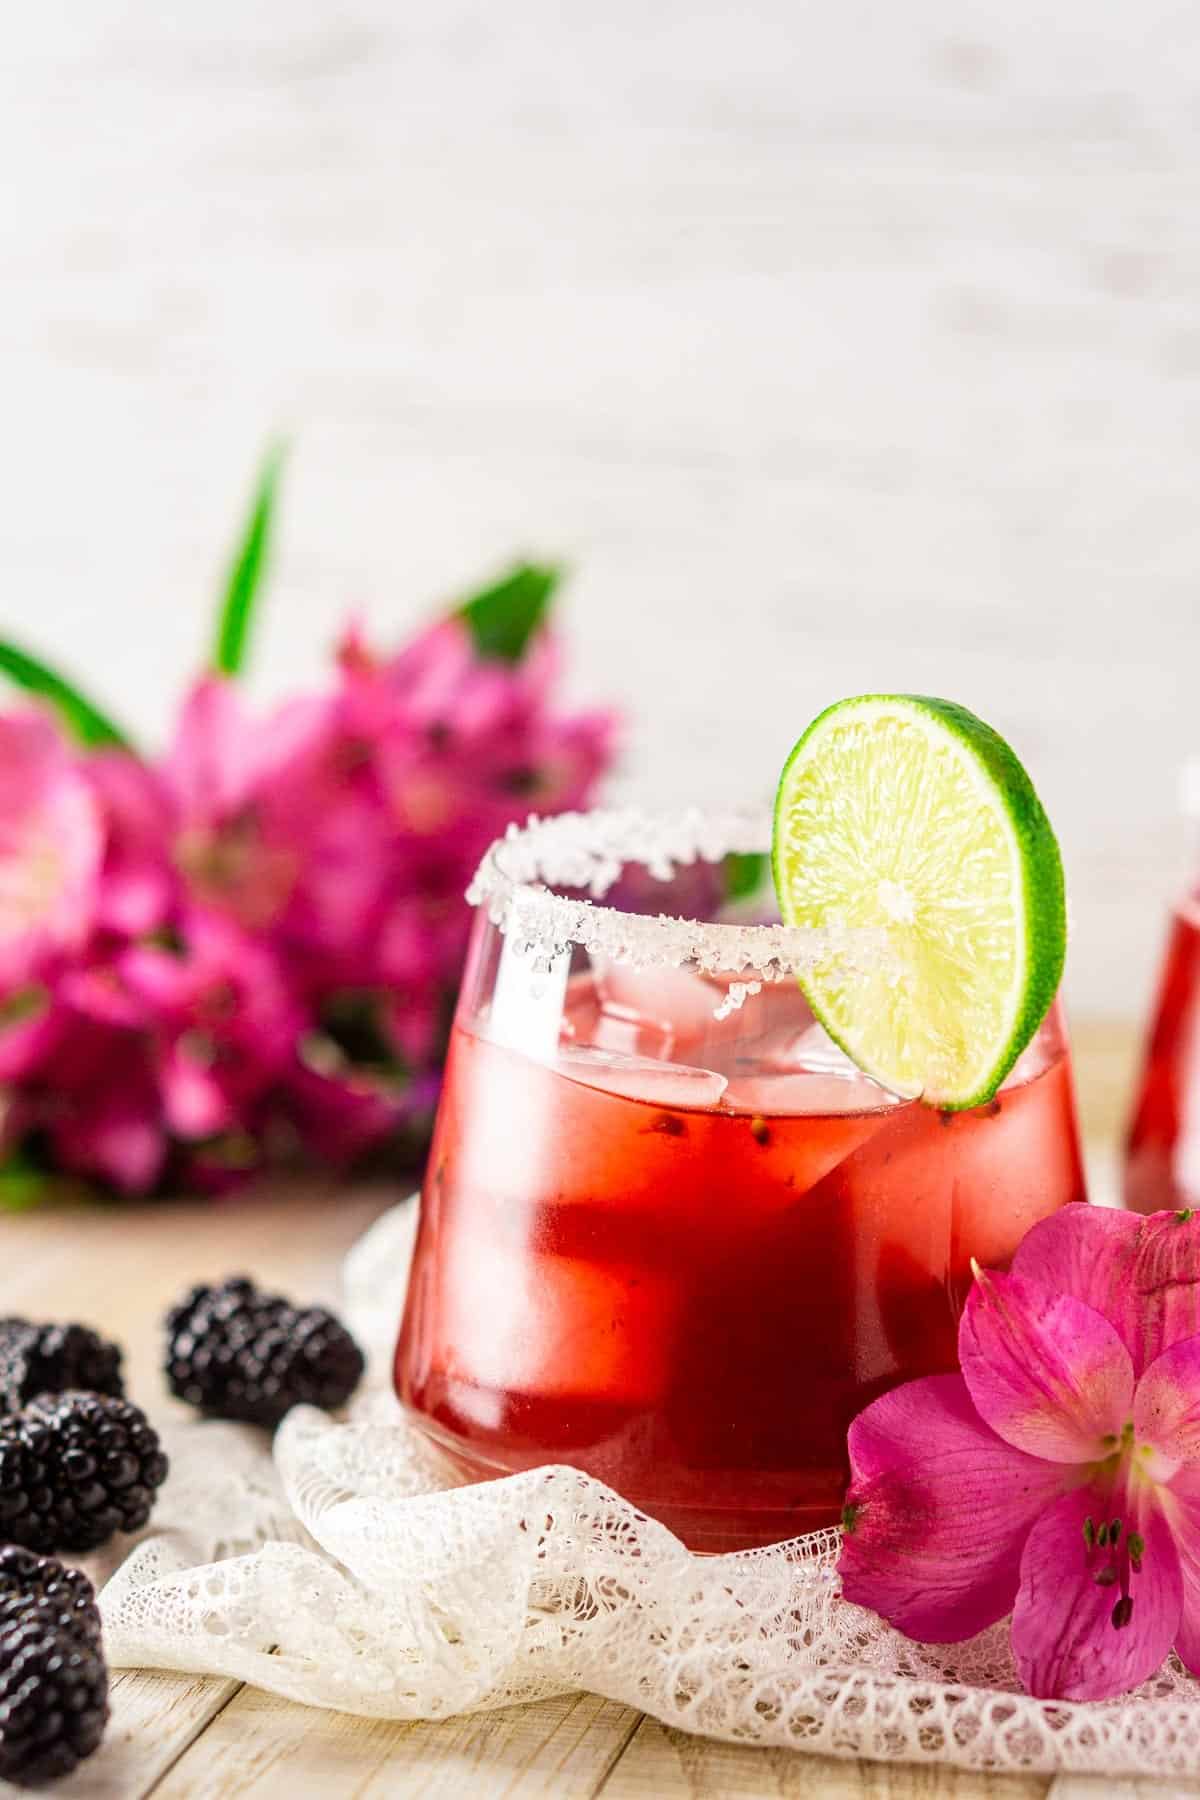 A fresh blackberry margarita on white lace with flowers behind it.